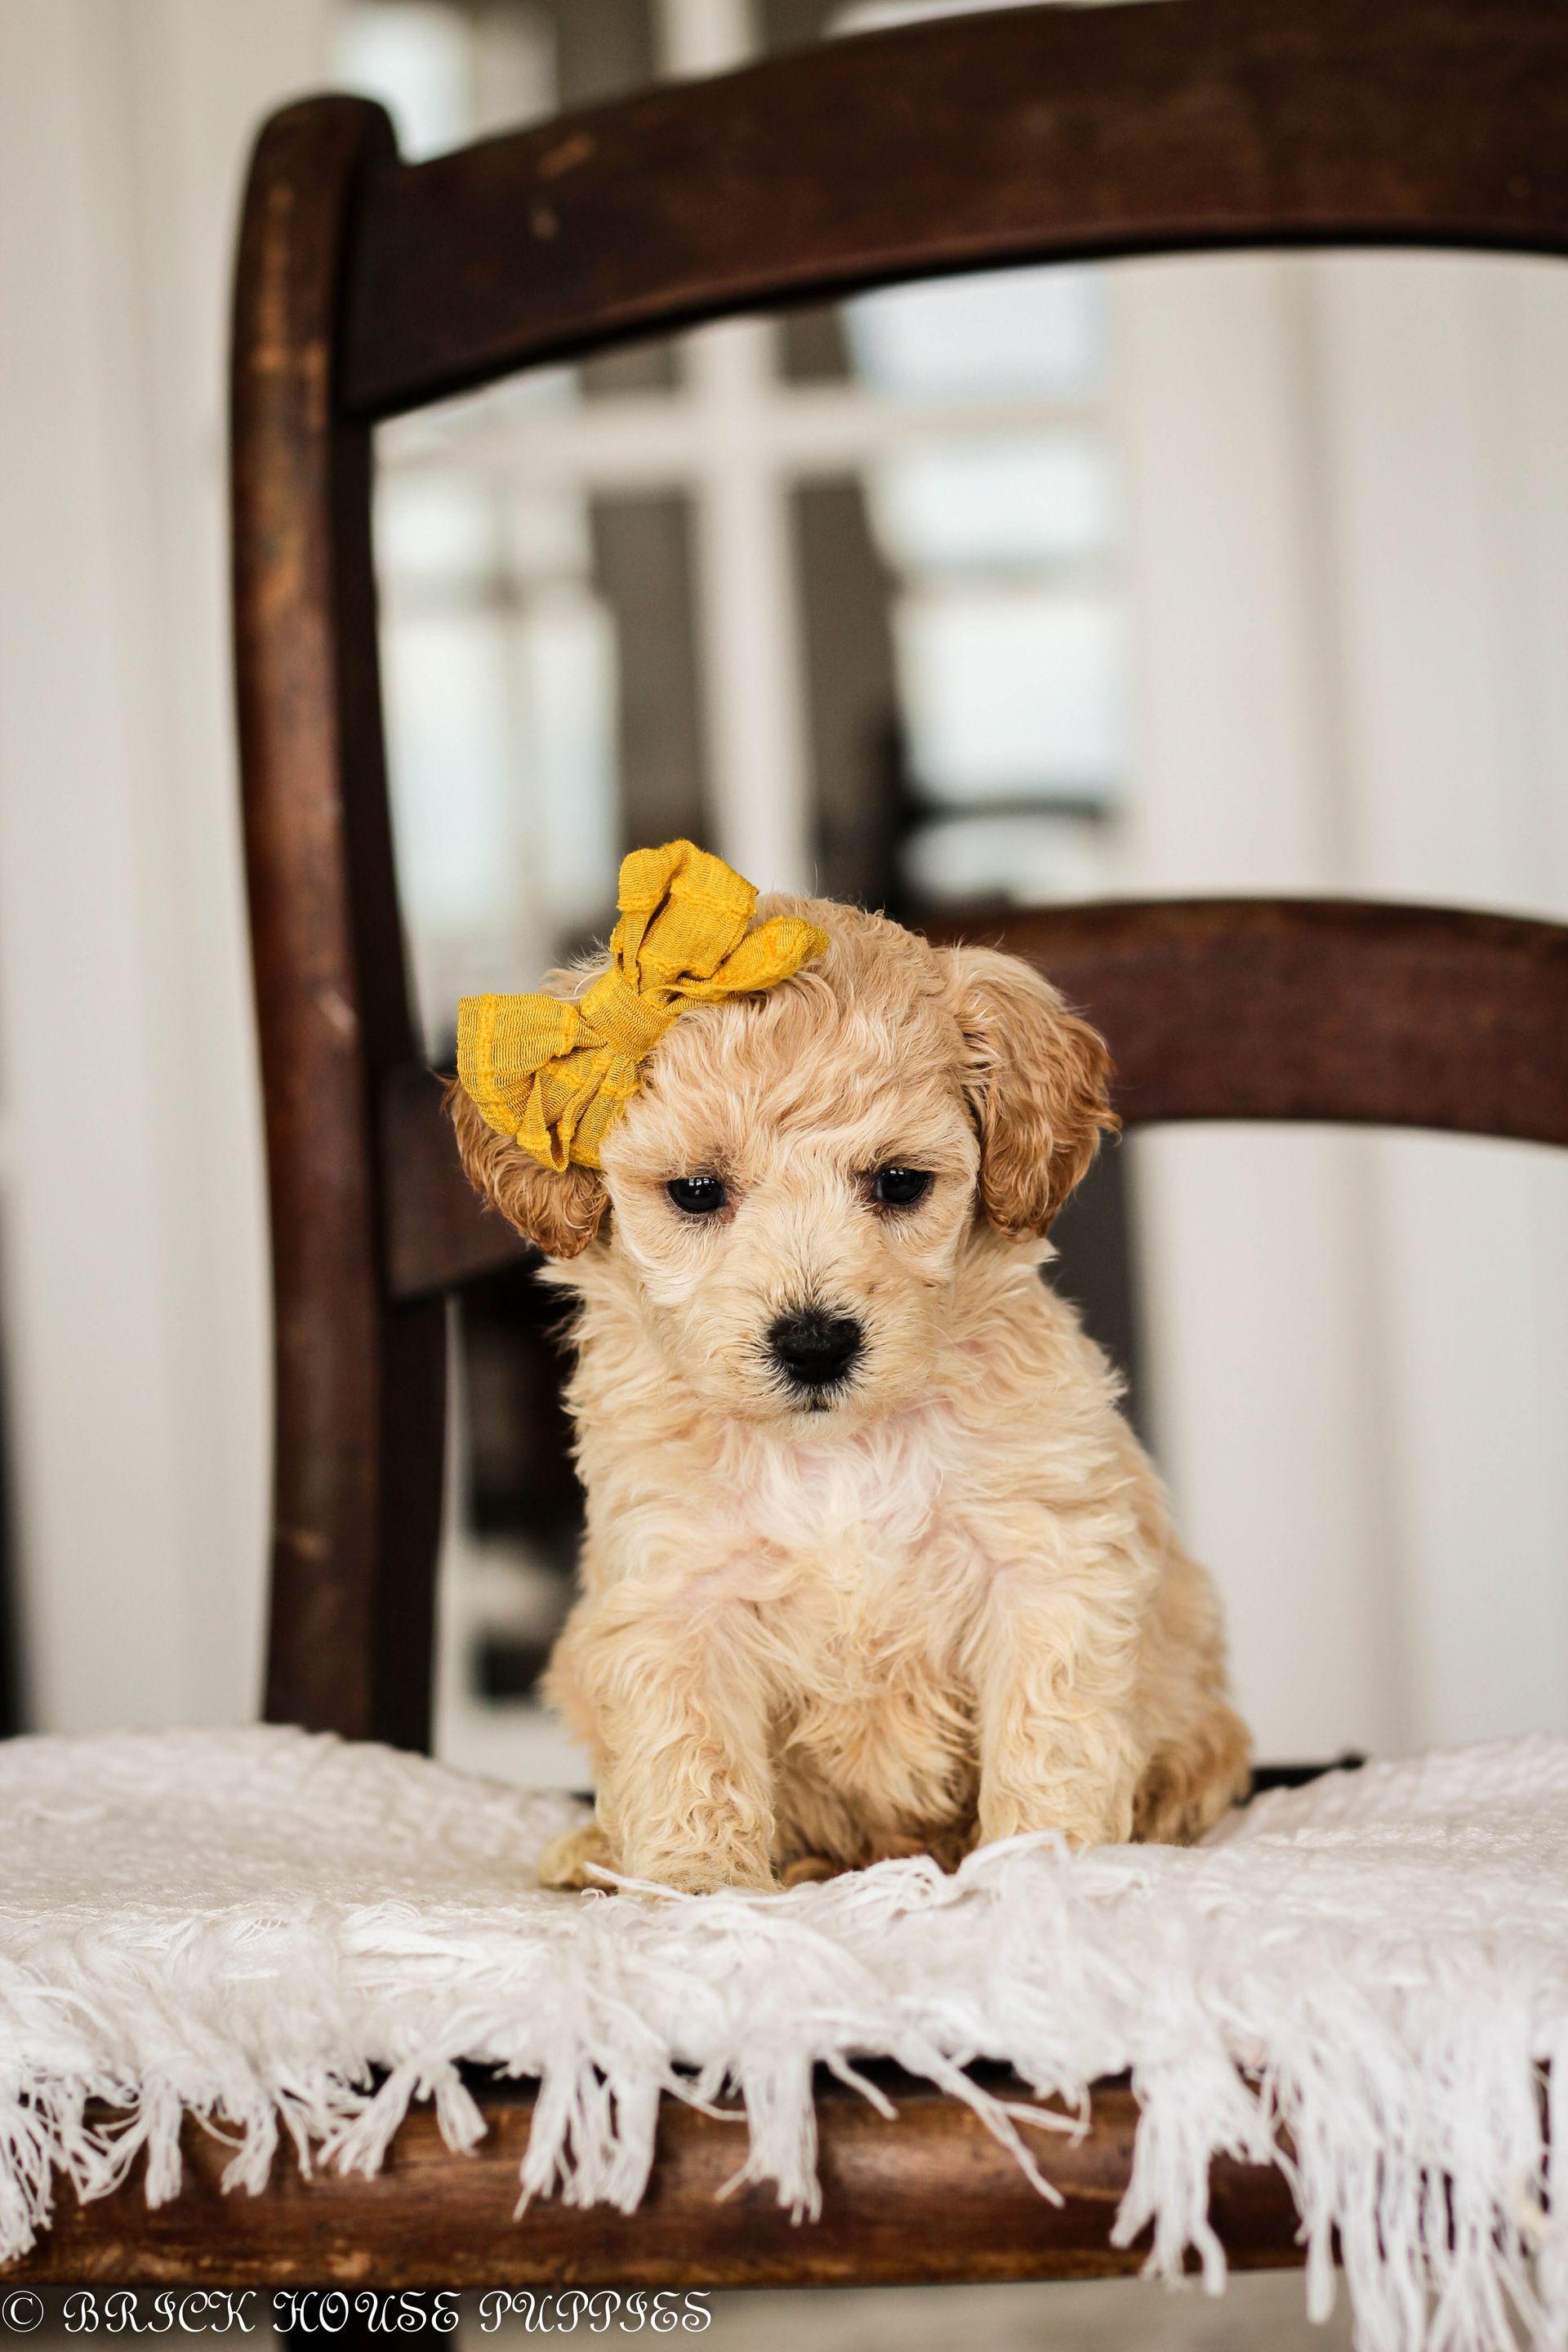 Poochon Puppies for sale, poochon puppies, bichpoo puppies, teddybear puppies for sale, teddybear puppies, teddybear puppy breeder, poochon breeder, puppies for sale